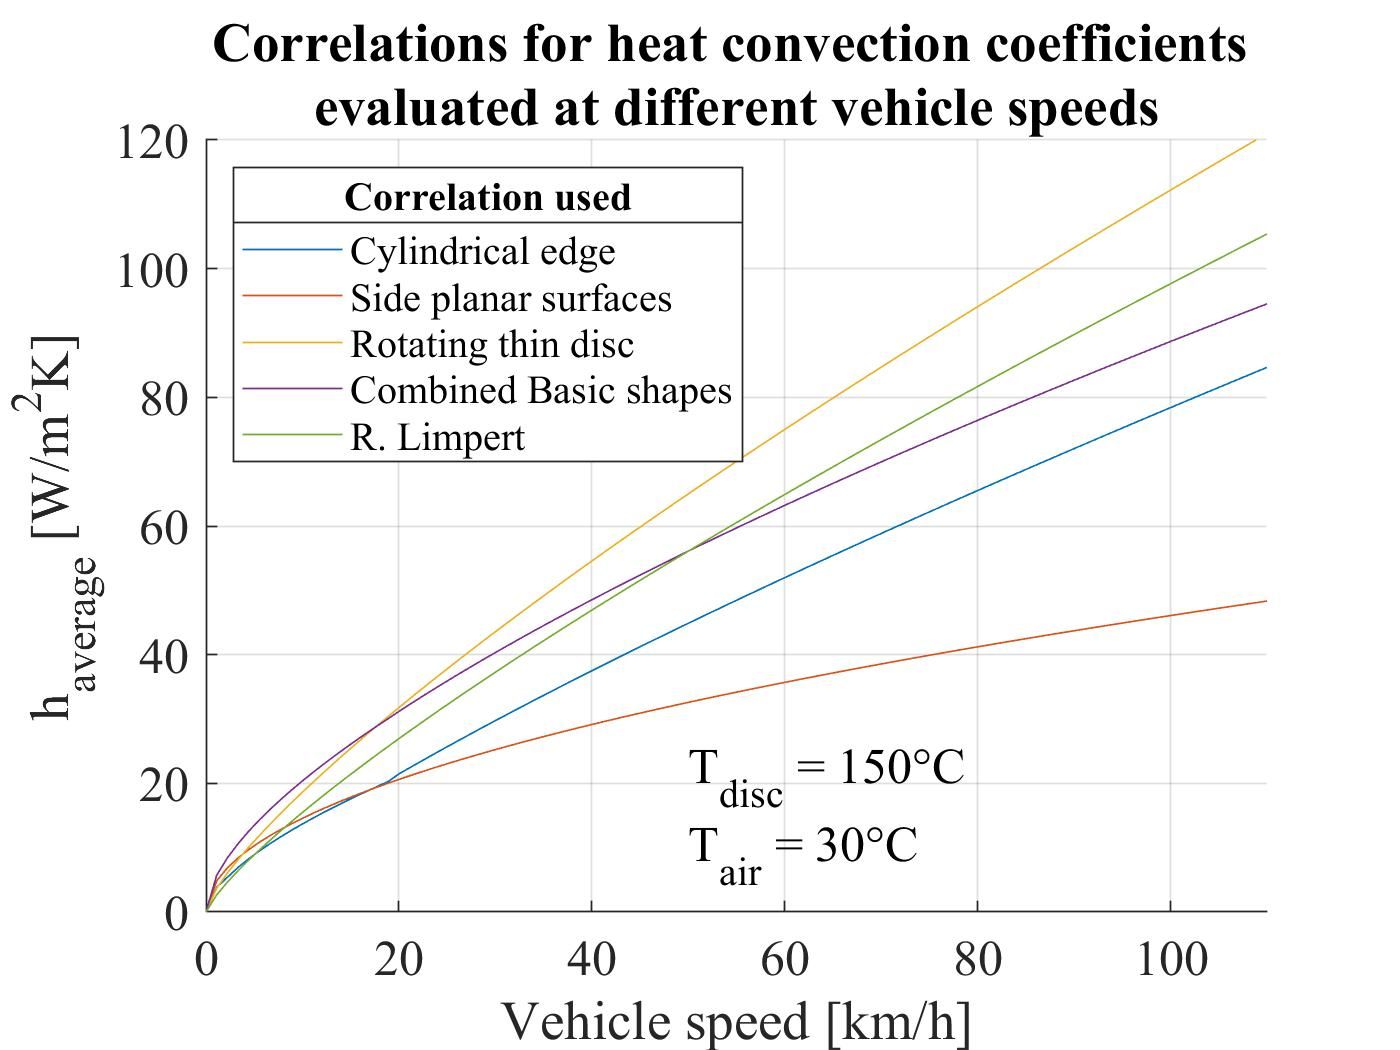 Computing the convection coefficient of a brake disc